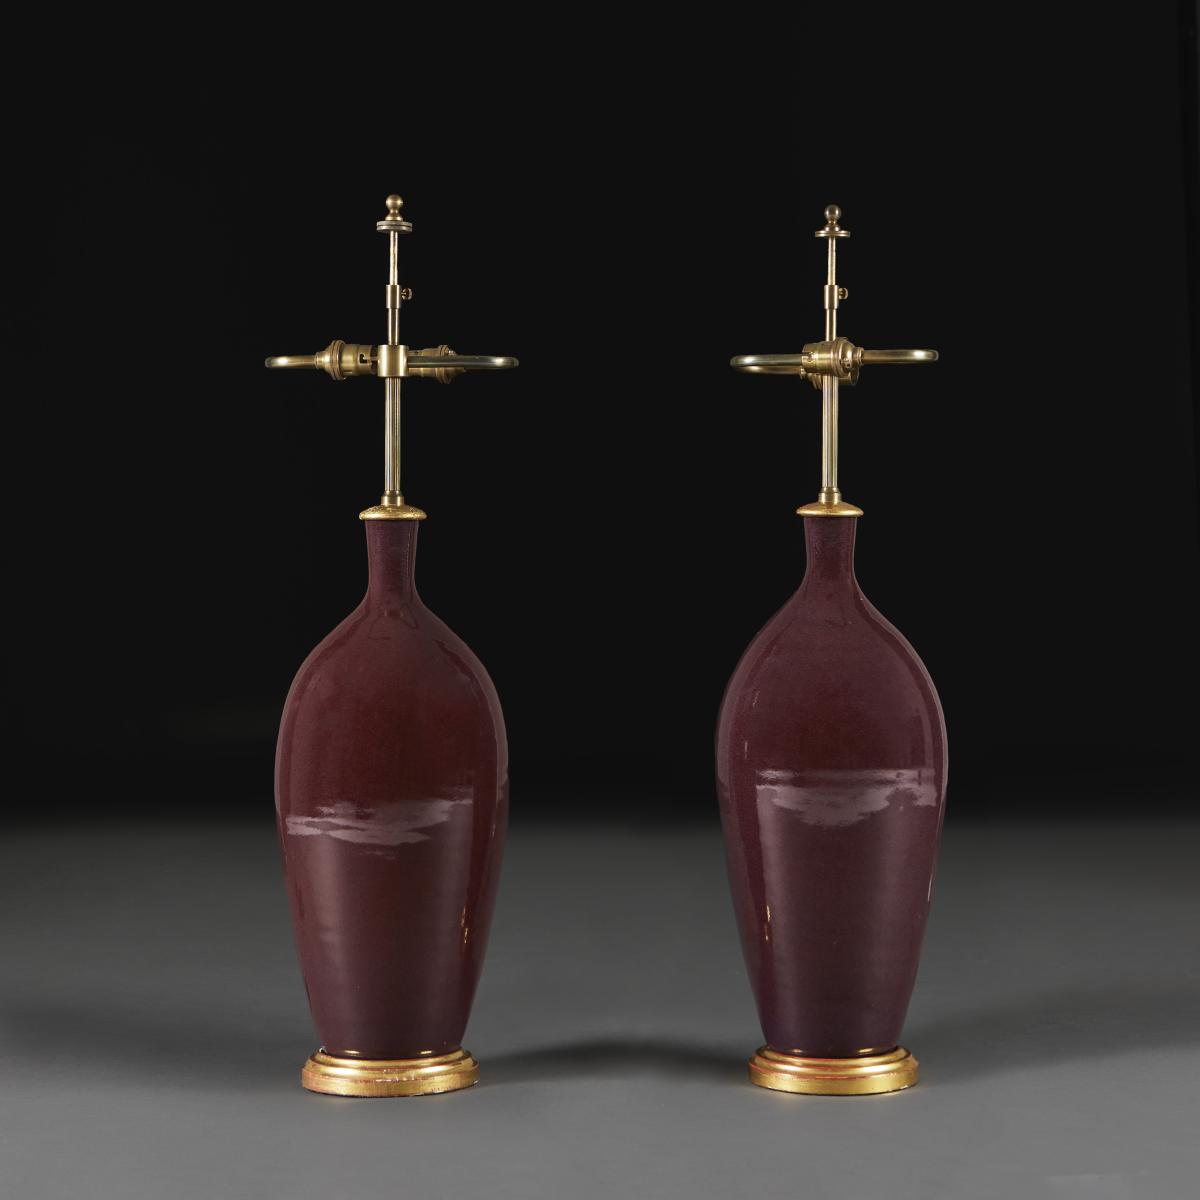 A Large Pair of Flambe Lamps Initialled RS